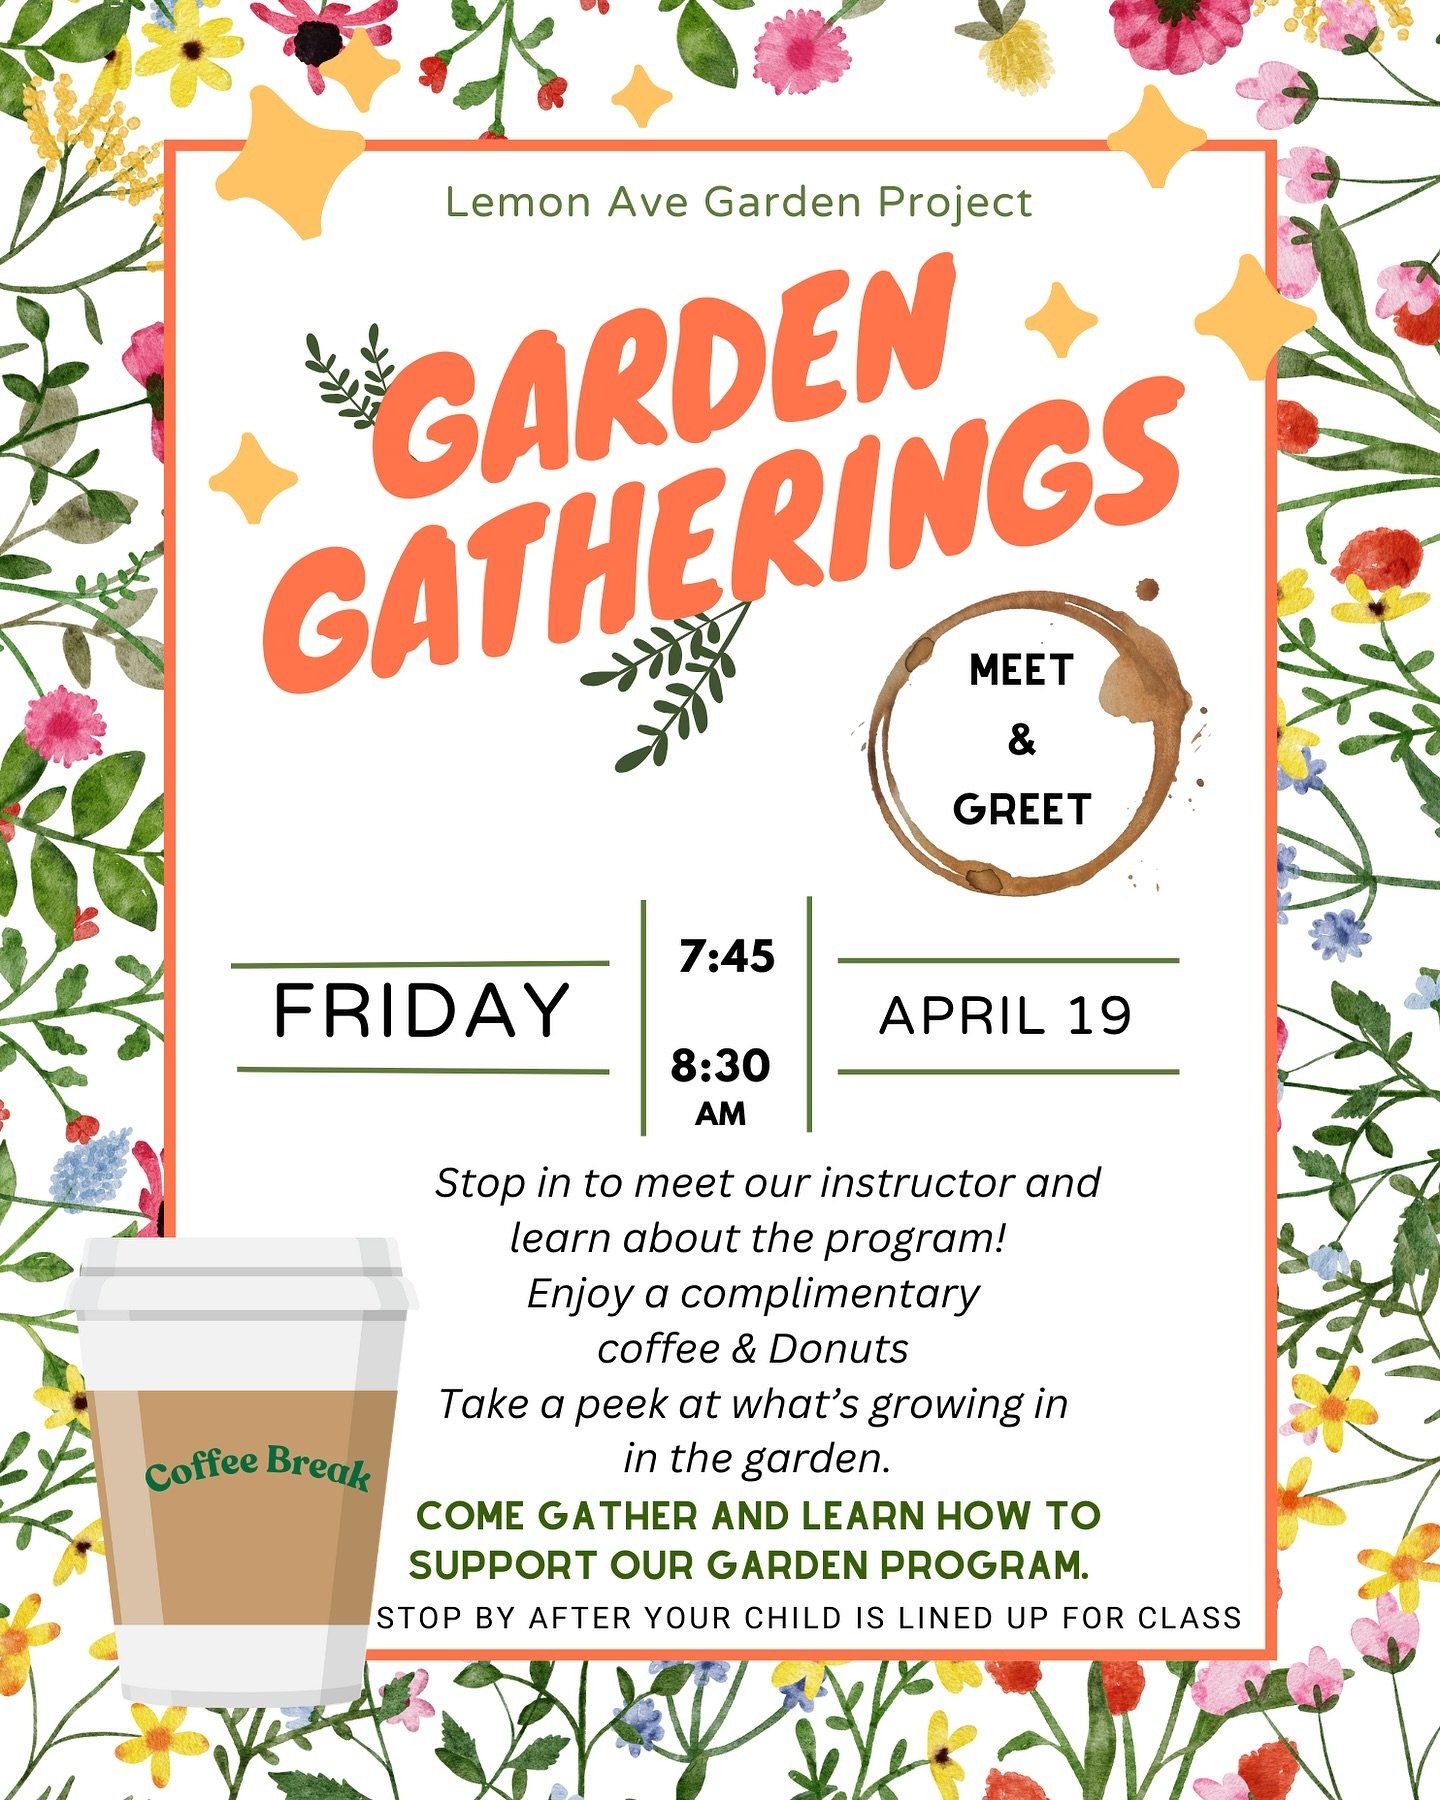 See you tomorrow in the garden! 🍩 ☕️ 🪴 Second in a series of Friday Garden Gatherings is happening Friday, April 19th, 7:45-8:30 after your child is lined up in their class line. 
Stop by for fresh hot coffee, donuts and see what we have growing an